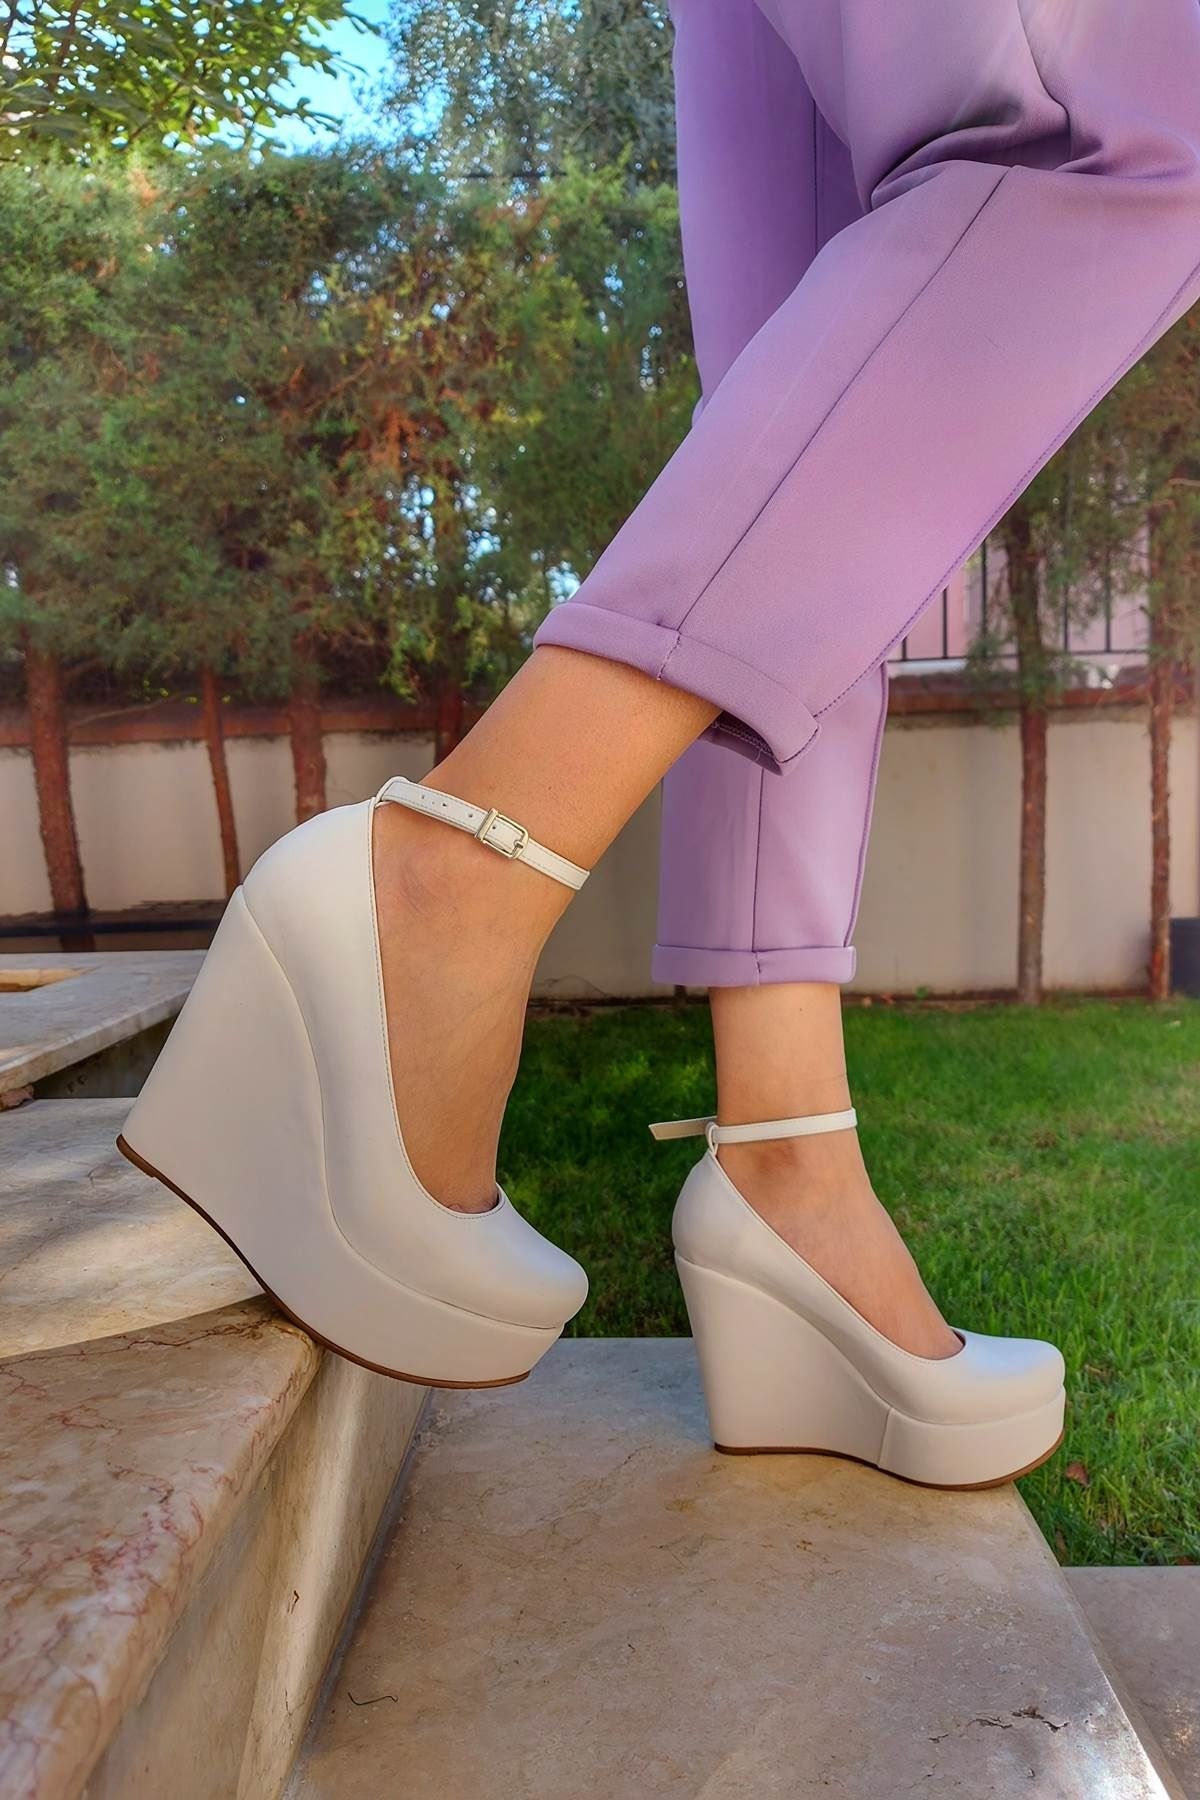 The color, EVERYTHING about these shoes are perfect | Heels, Fashion shoes,  Crazy shoes